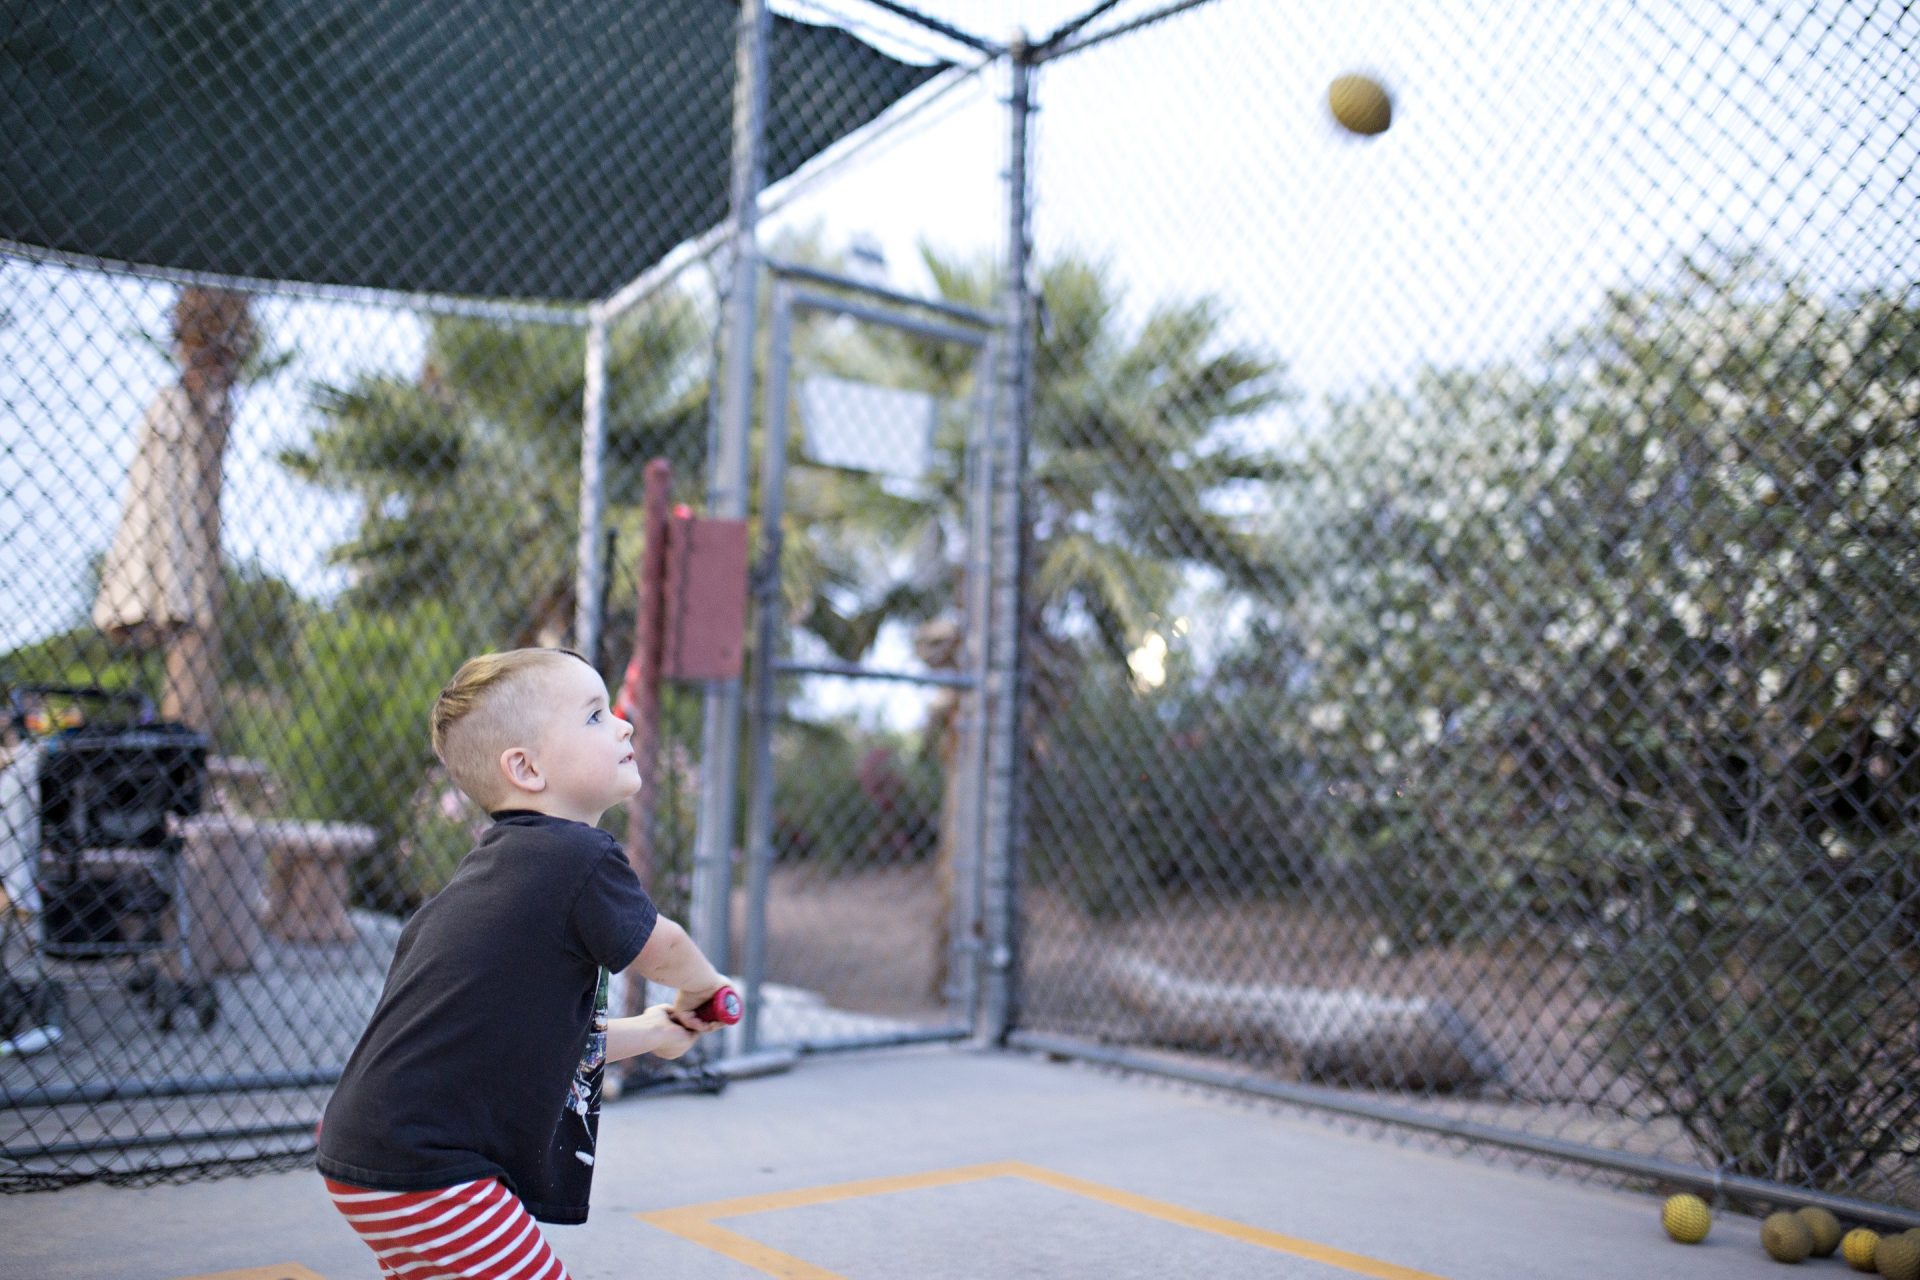 How to get your kids started in softball – The basics of the game and what they need to know to